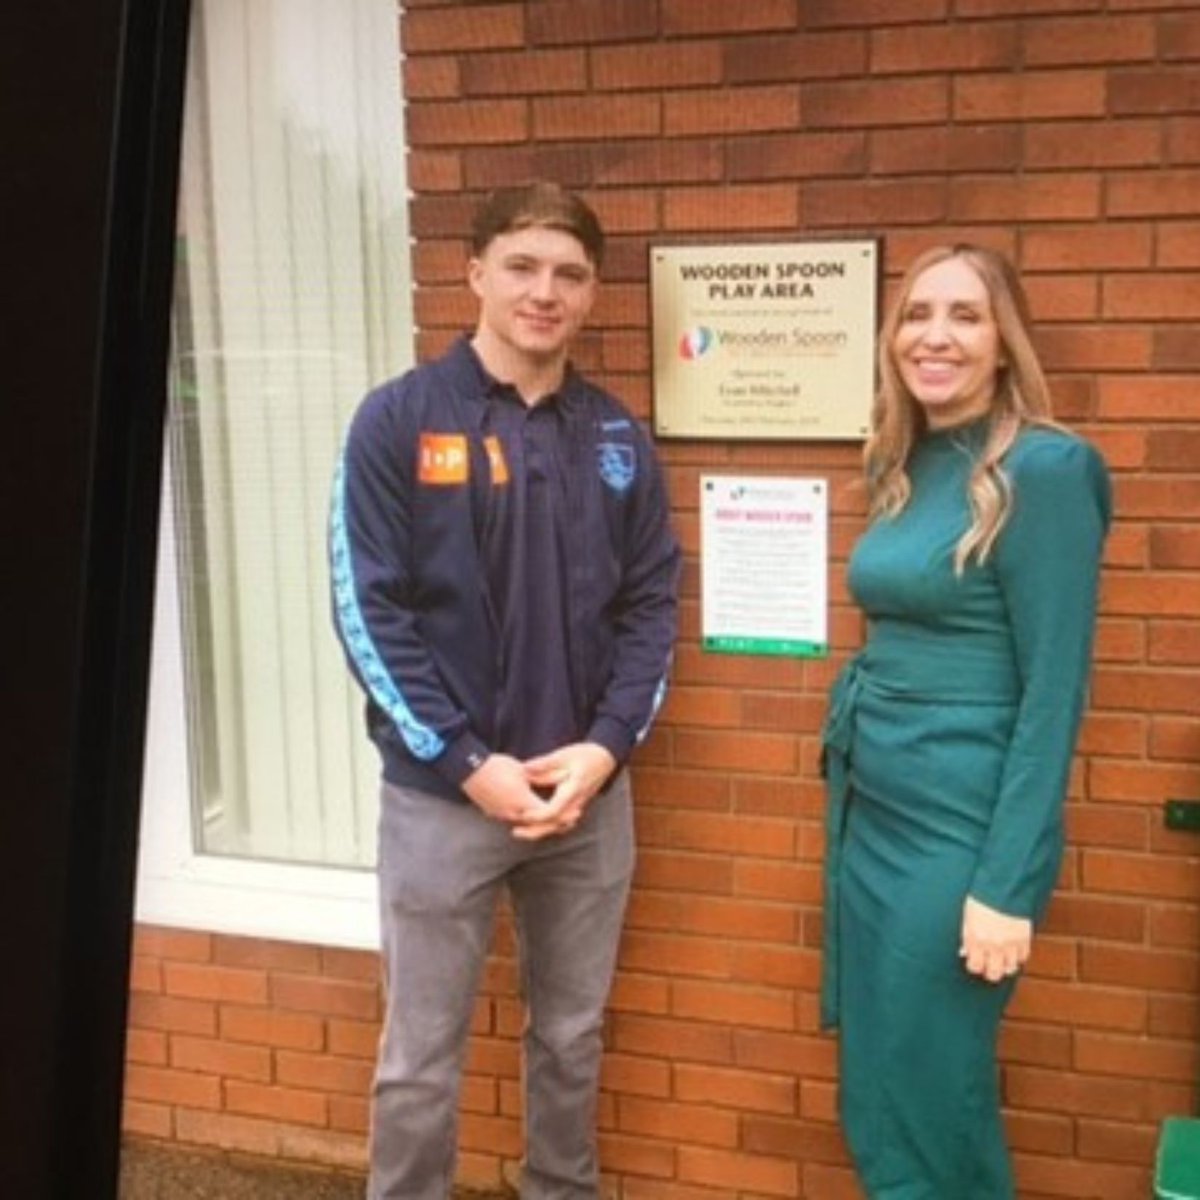 Fly half Evan Mitchell officially opened the Wooden Spoon play area at Dudley Lodge in Coventry. The play area funded by Wooden Spoon Warwickshire, will provide vulnerable children who have experienced unsafe parenting with a haven to play, grow and build new friendships.